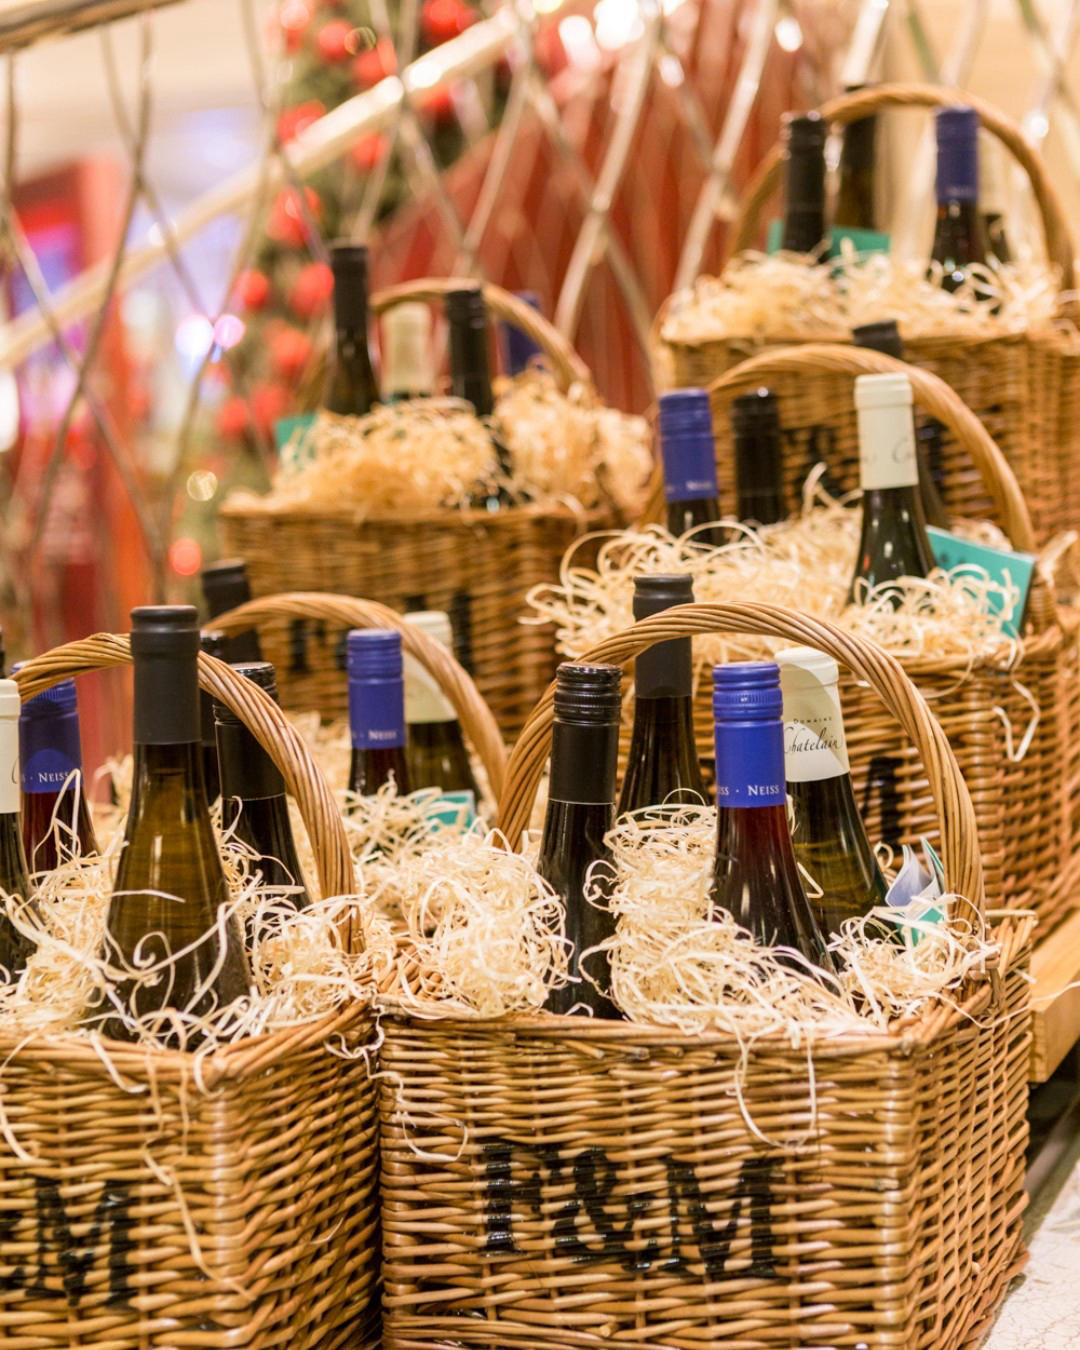 Fortnum & Mason - The only thing better than one wonderful bottle of wine is a wicker containing fou